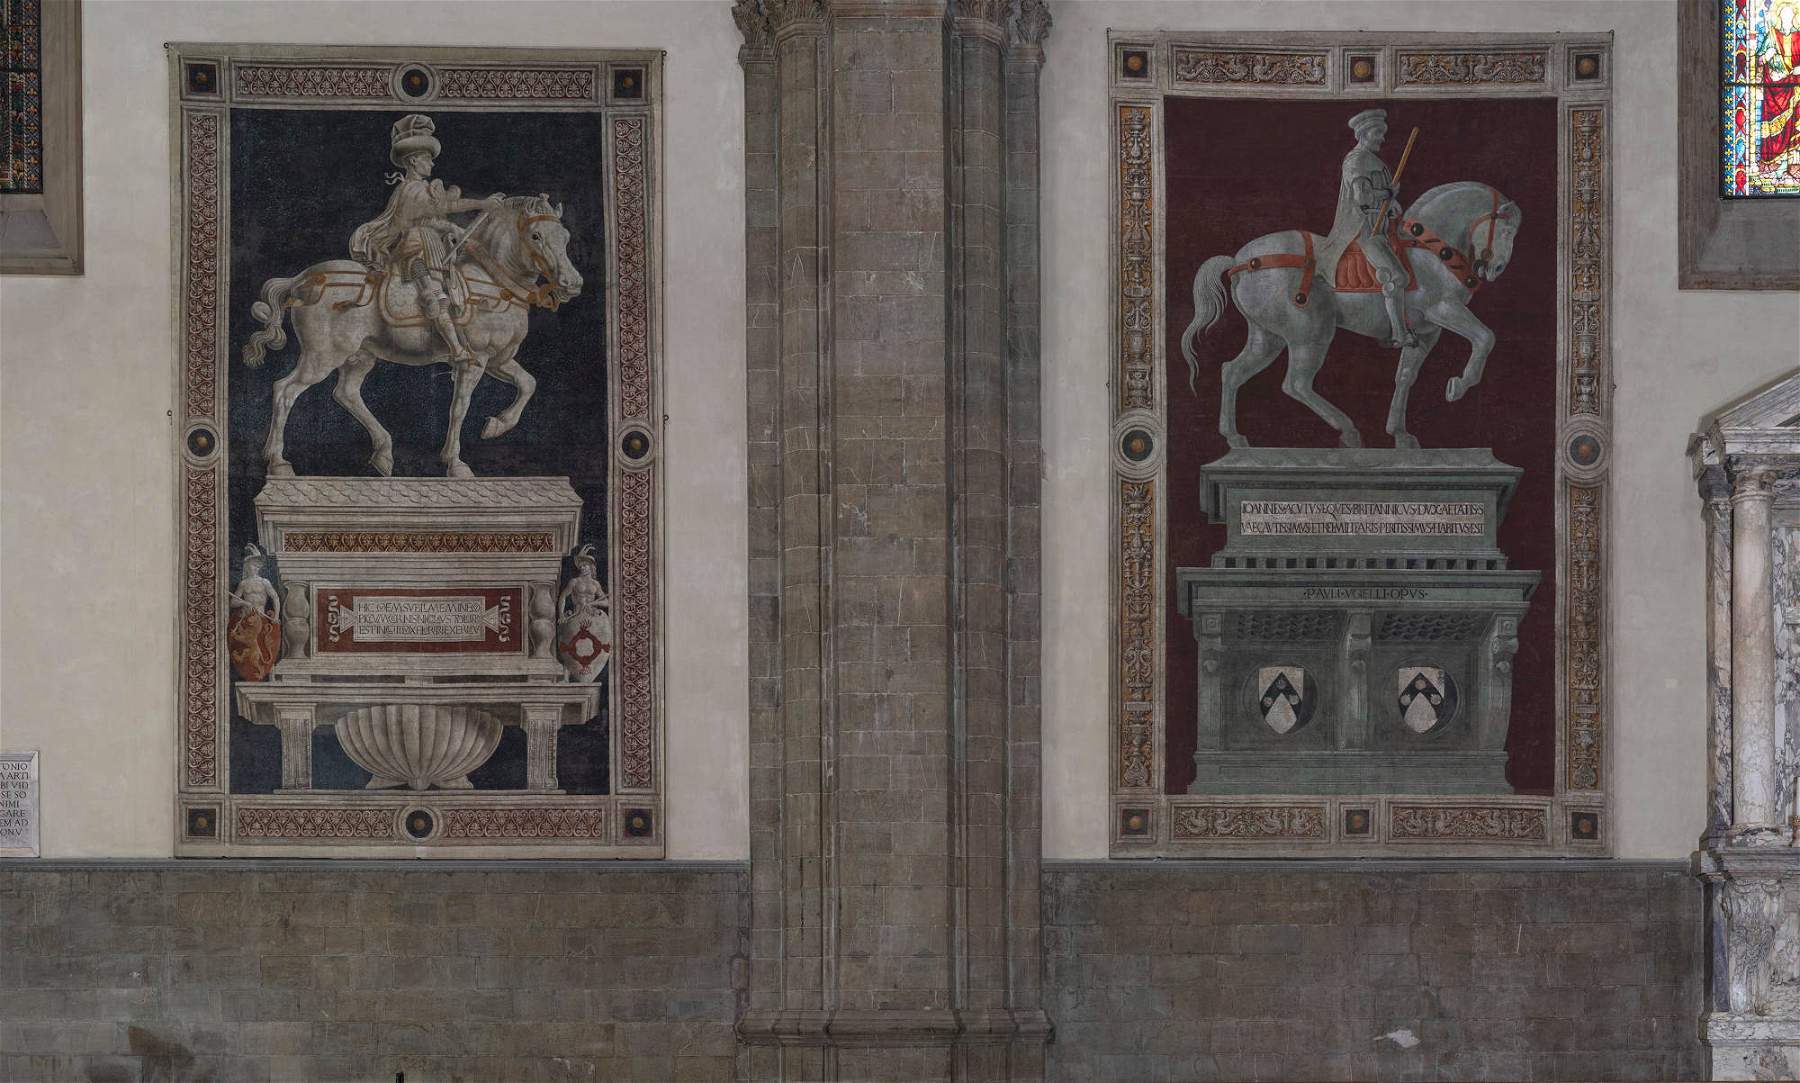 Florence, restoration of frescoes featuring Giovanni Acuto and NiccolÃ² da Tolentino begins in the Duomo 